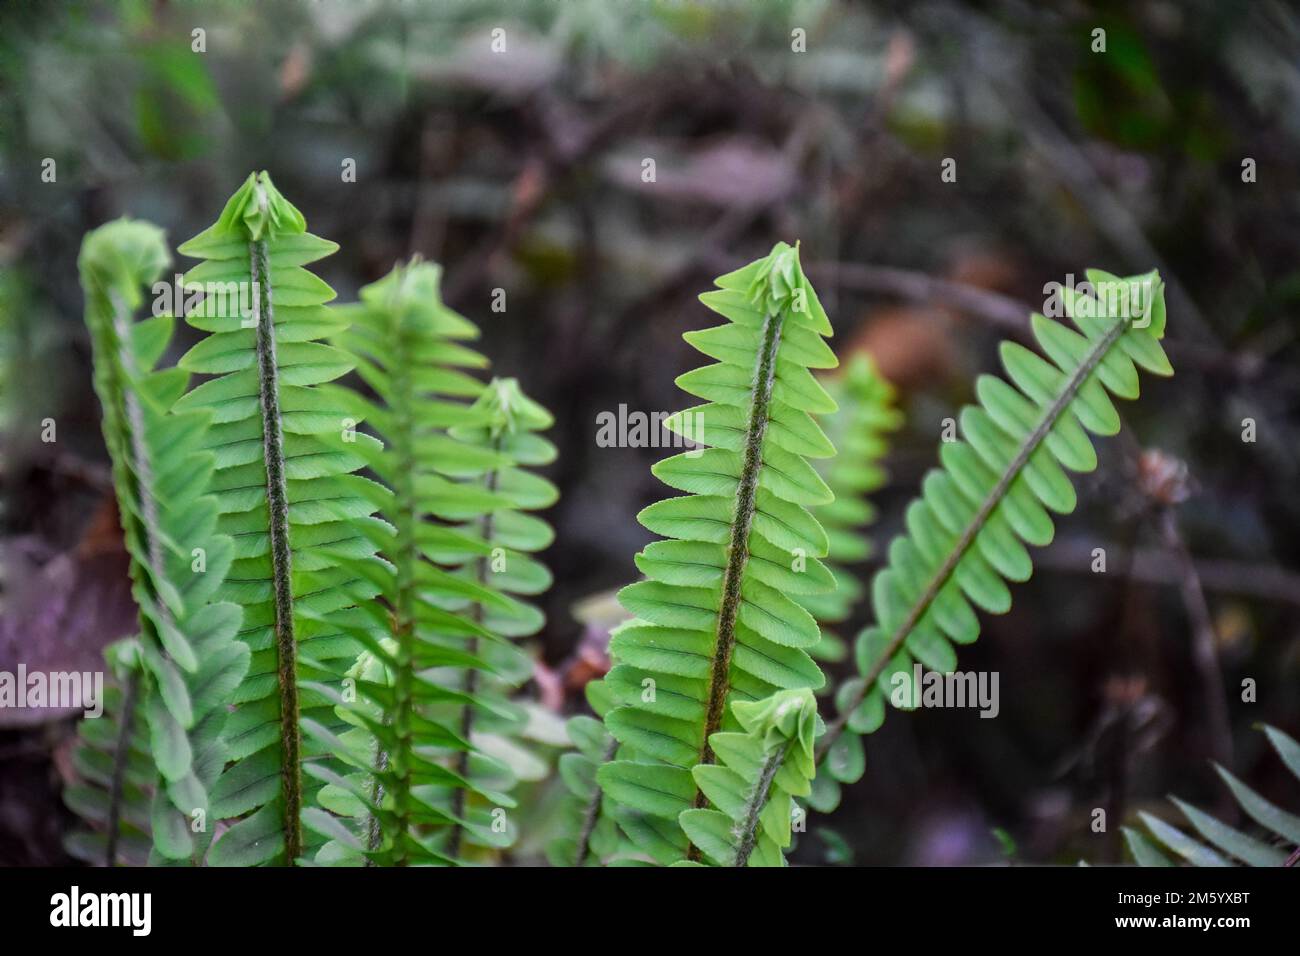 Nephrolepis exaltata, the sword fern is admired for able to survive with fairly low levels of water, commonly known as Flat Fern. Stock Photo